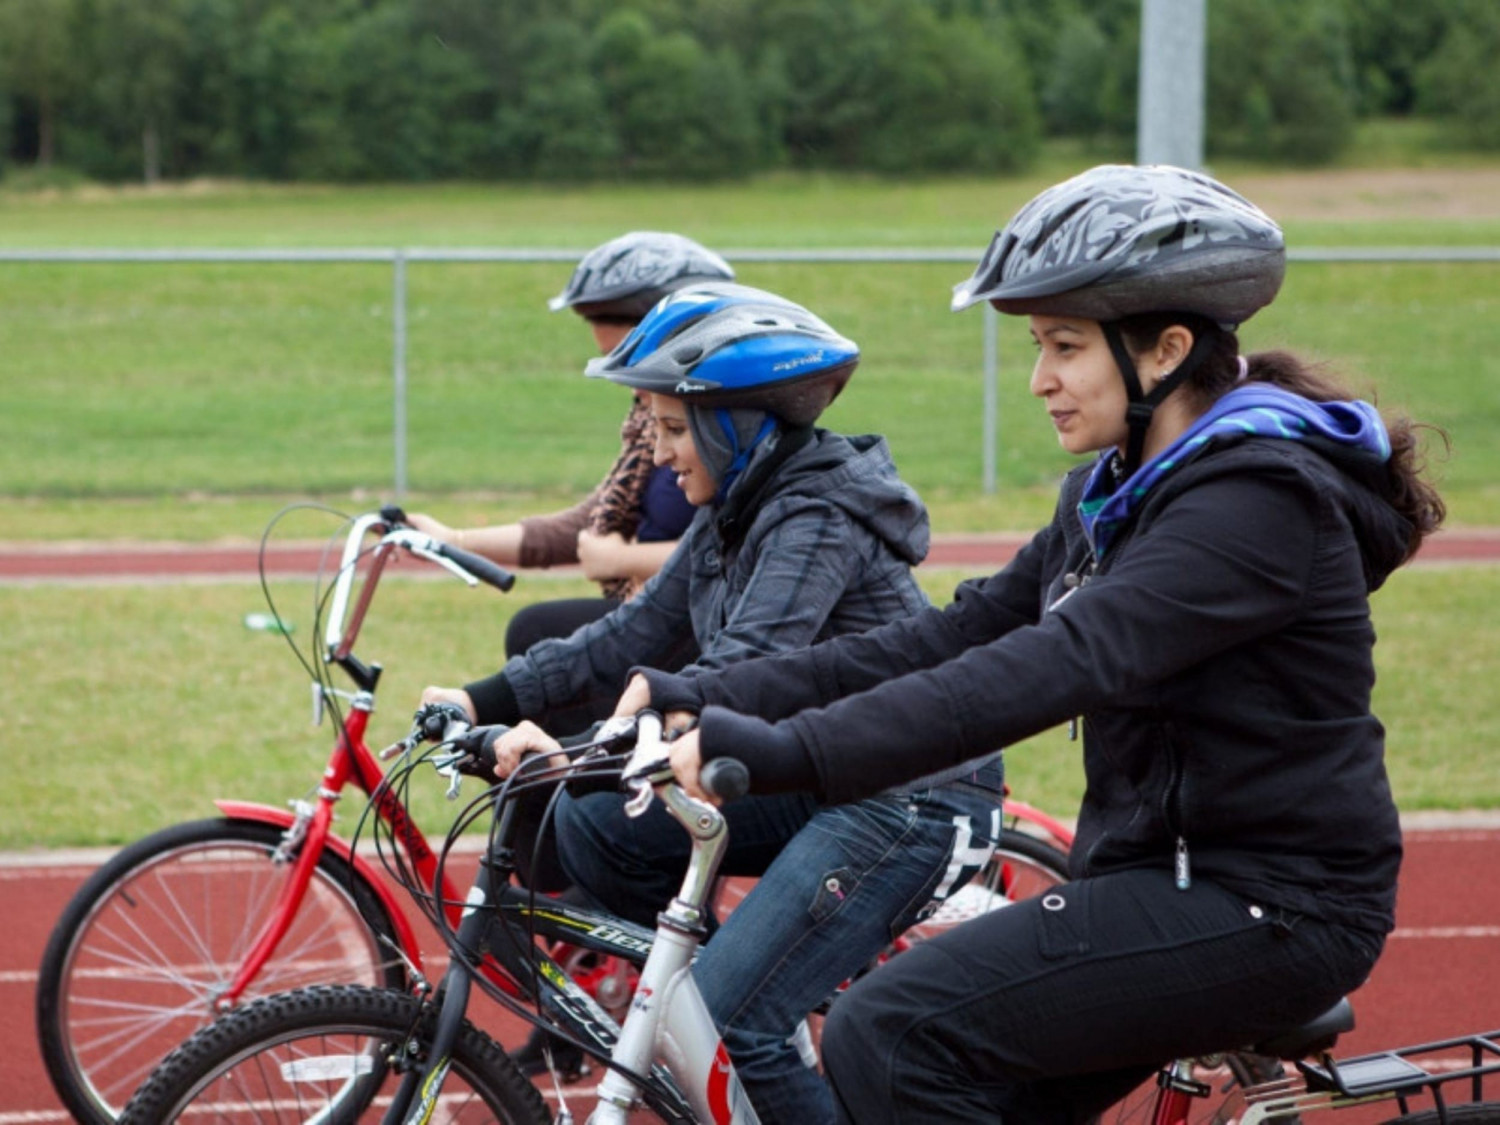 Group cycling round track